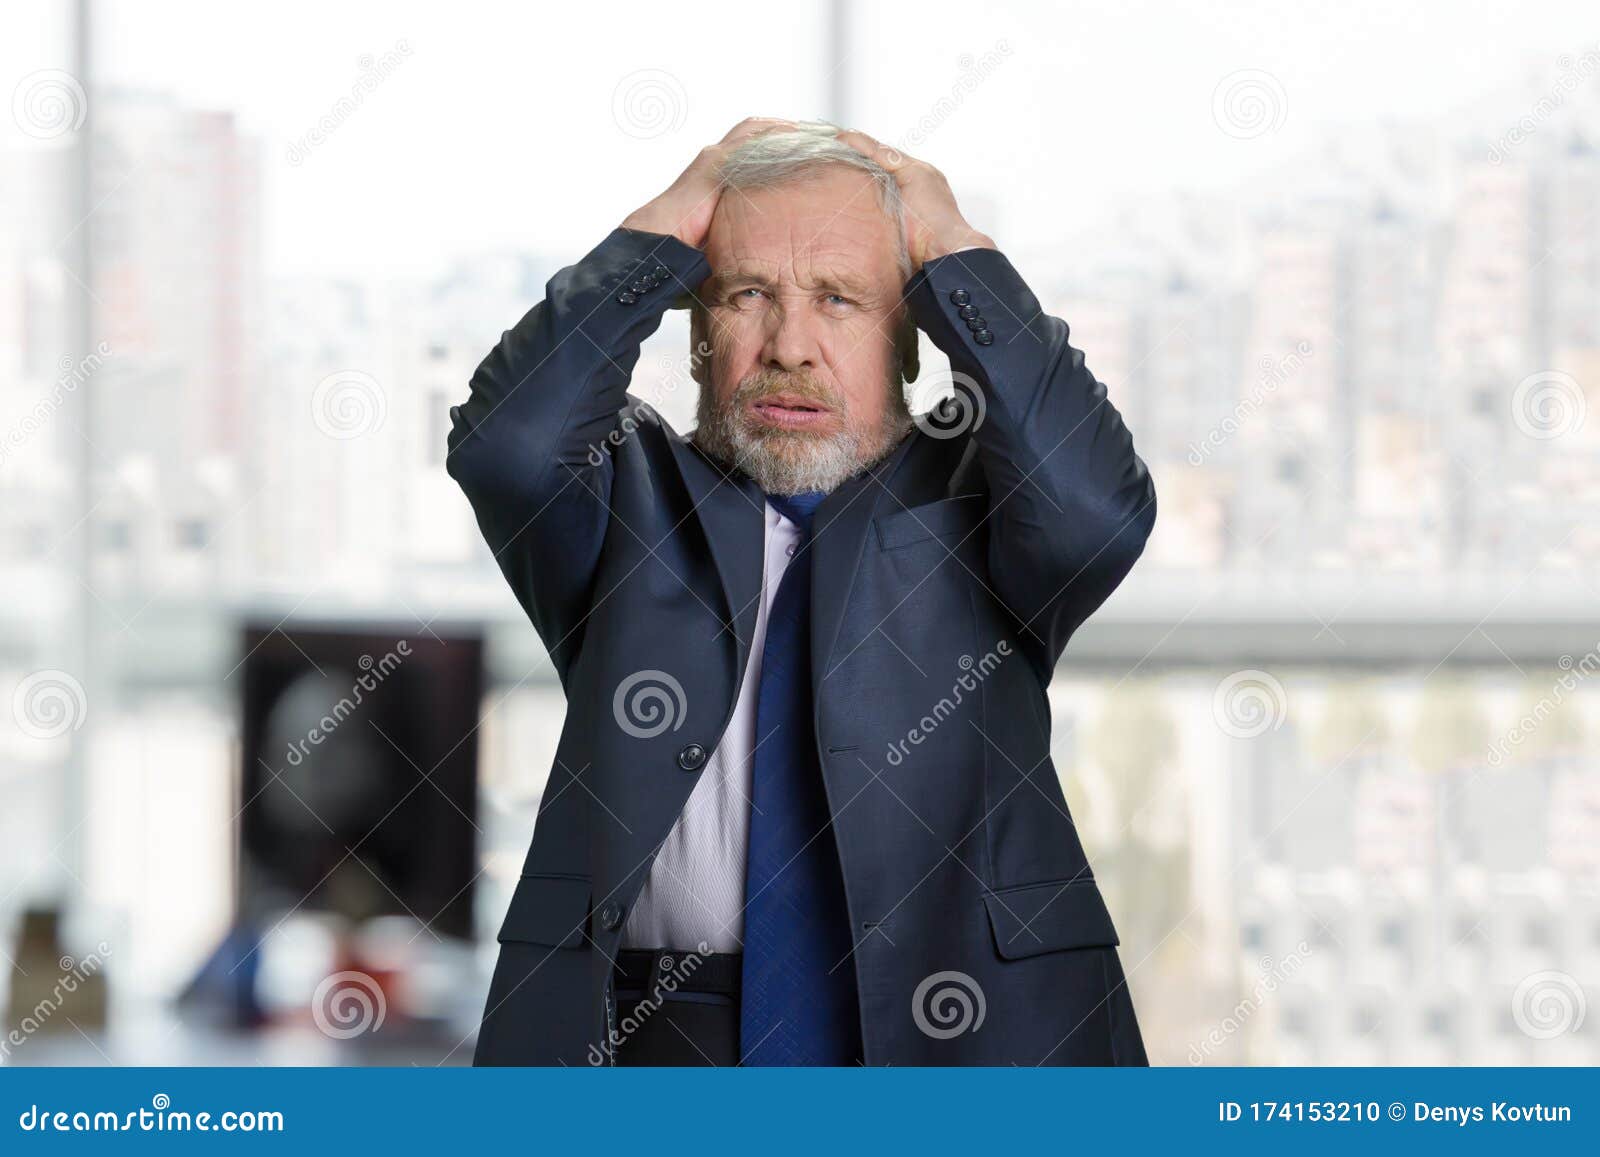 extremely-disappointed-fired-old-man-senior-office-clerk-lost-his-job-feeling-sadness-frustration-holding-head-blurred-bright-174153210.jpg